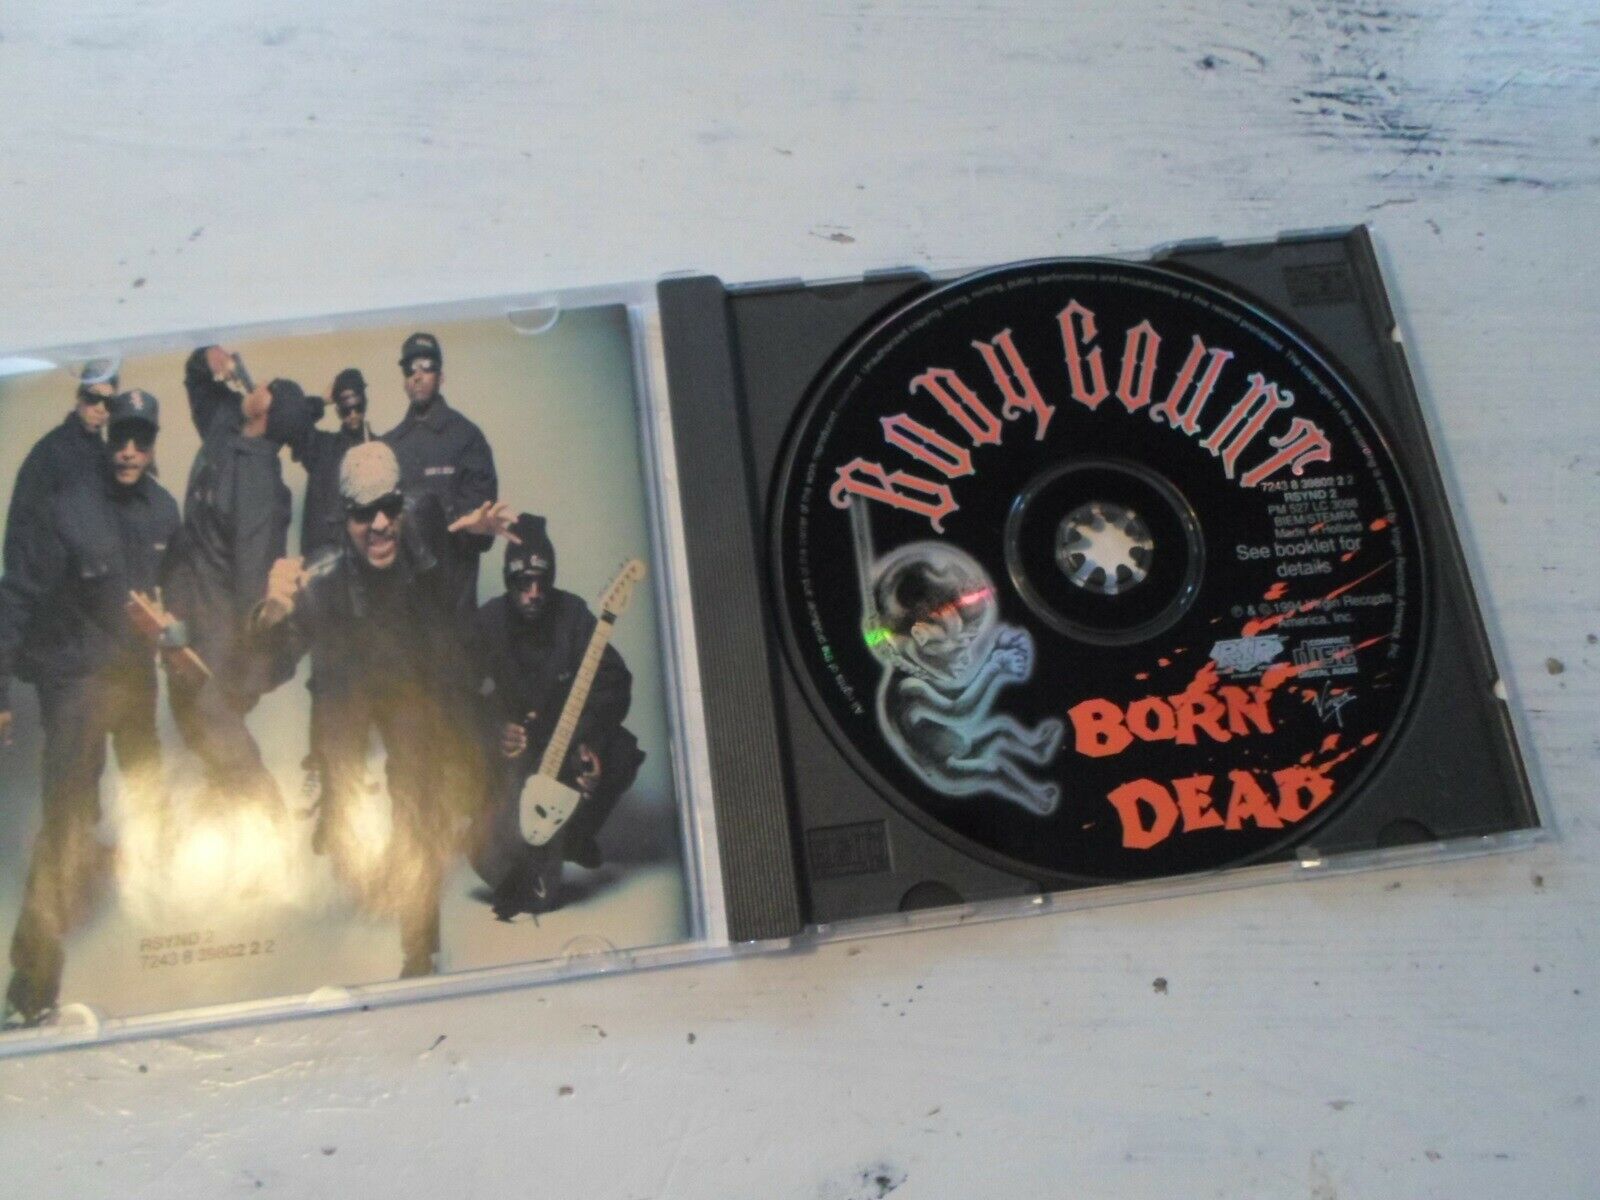 Body Count (Ice T): Brond Dead, hiphop